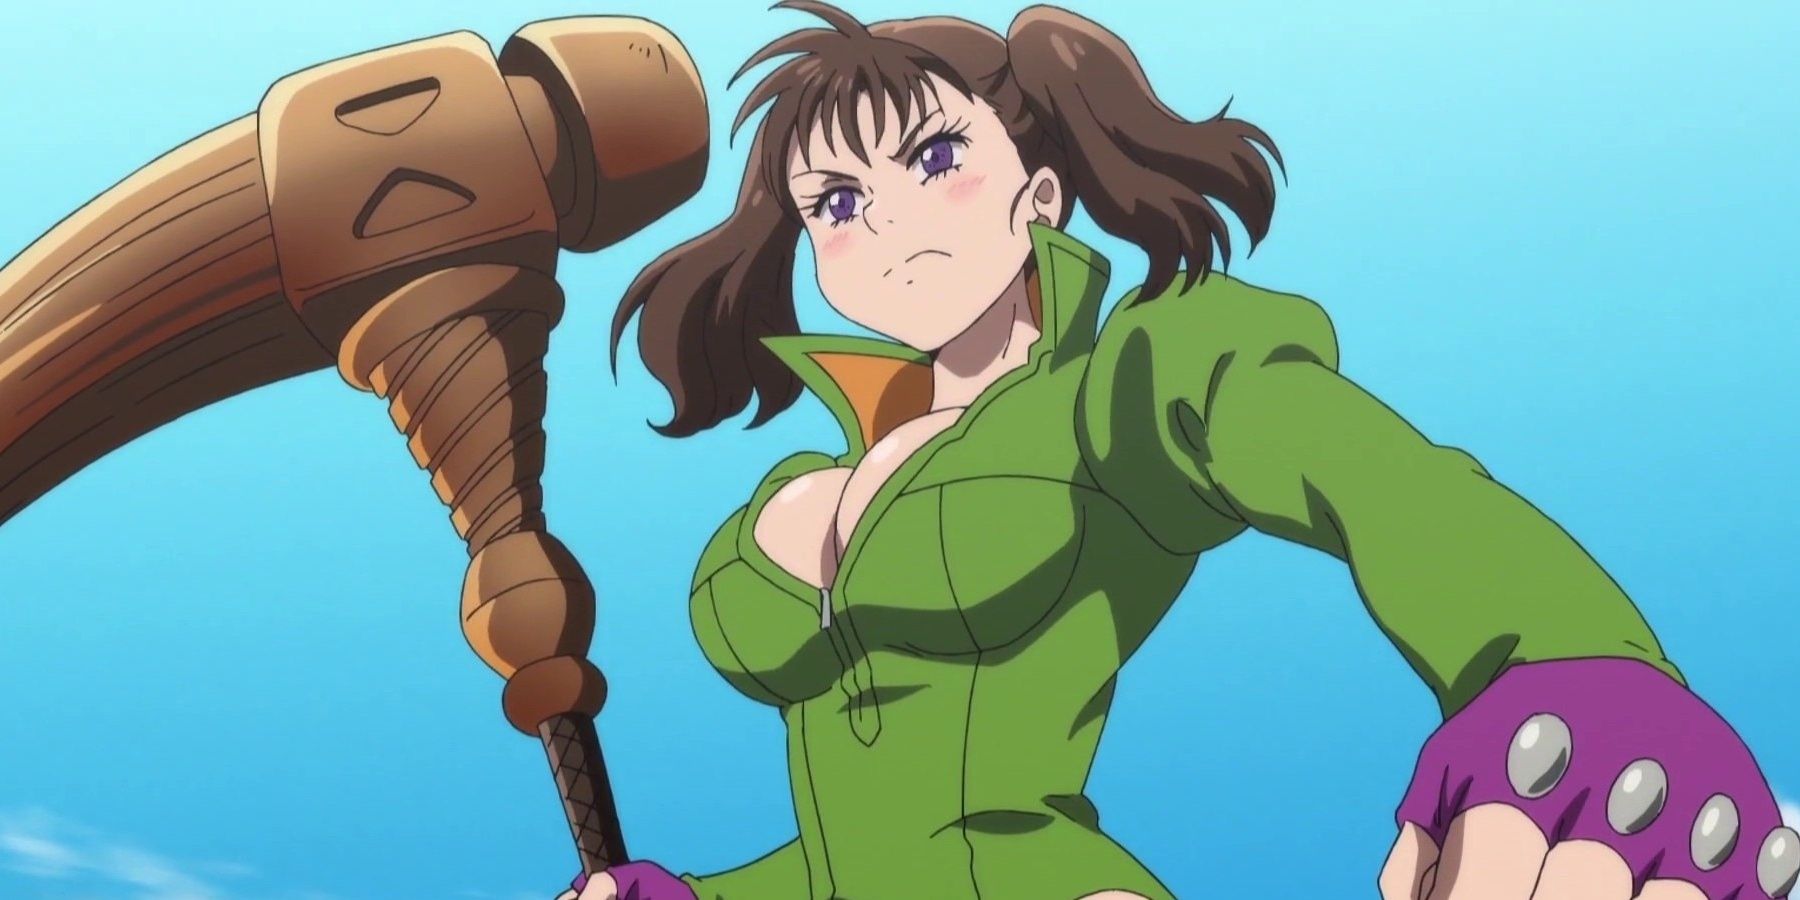 Diane wielding her weapon and looking determined in Seven Deadly Sins